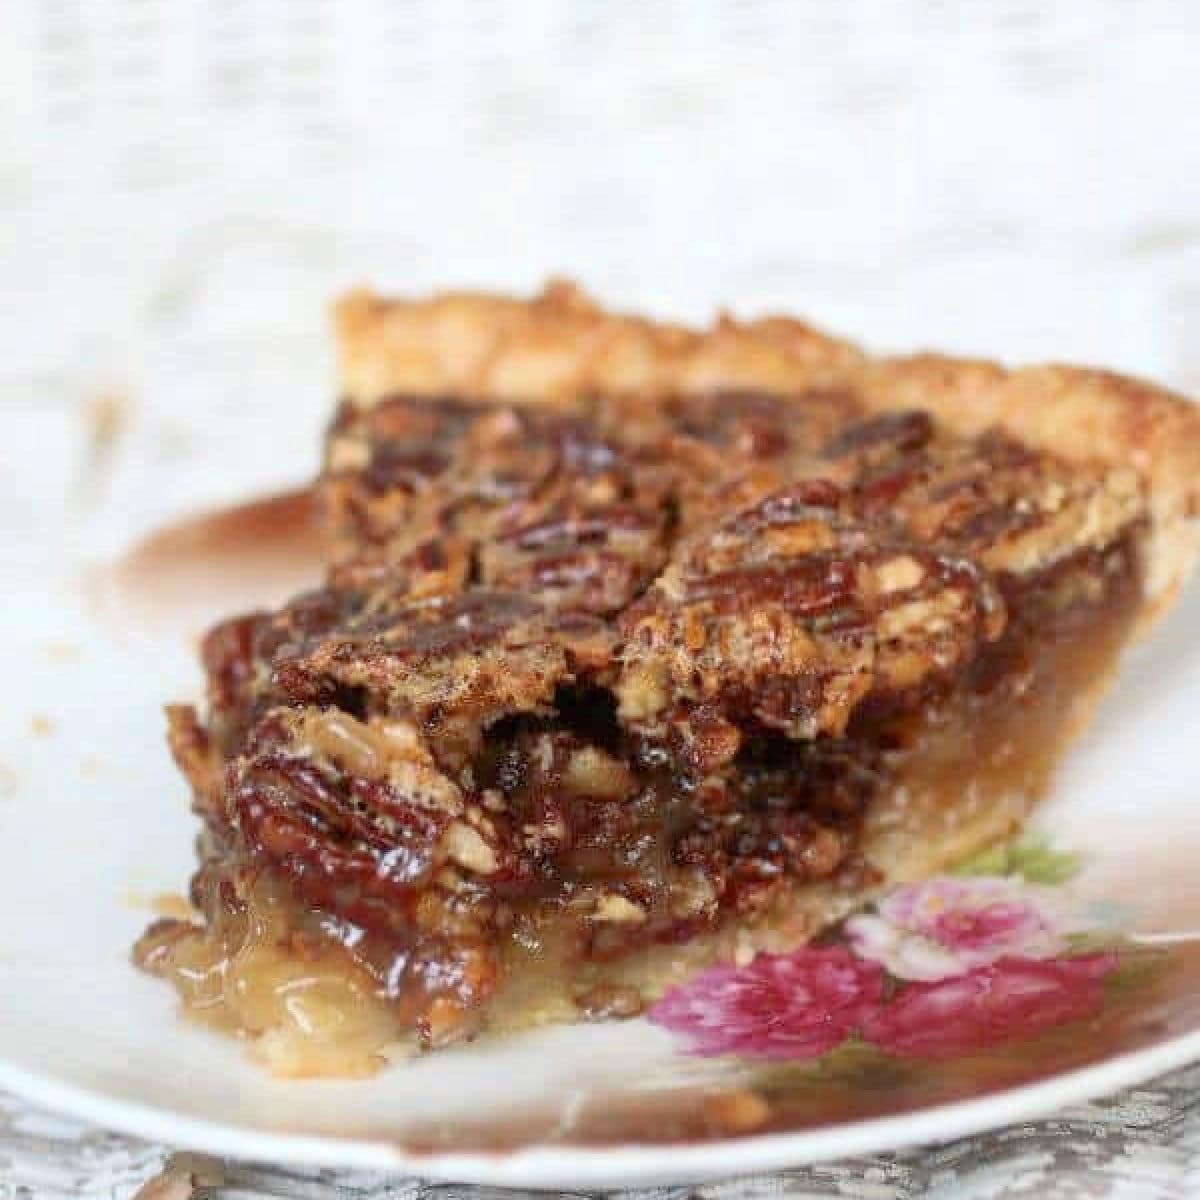 Close up of a slice of old fashioned southern pecan pie with the filling running out of the sides.